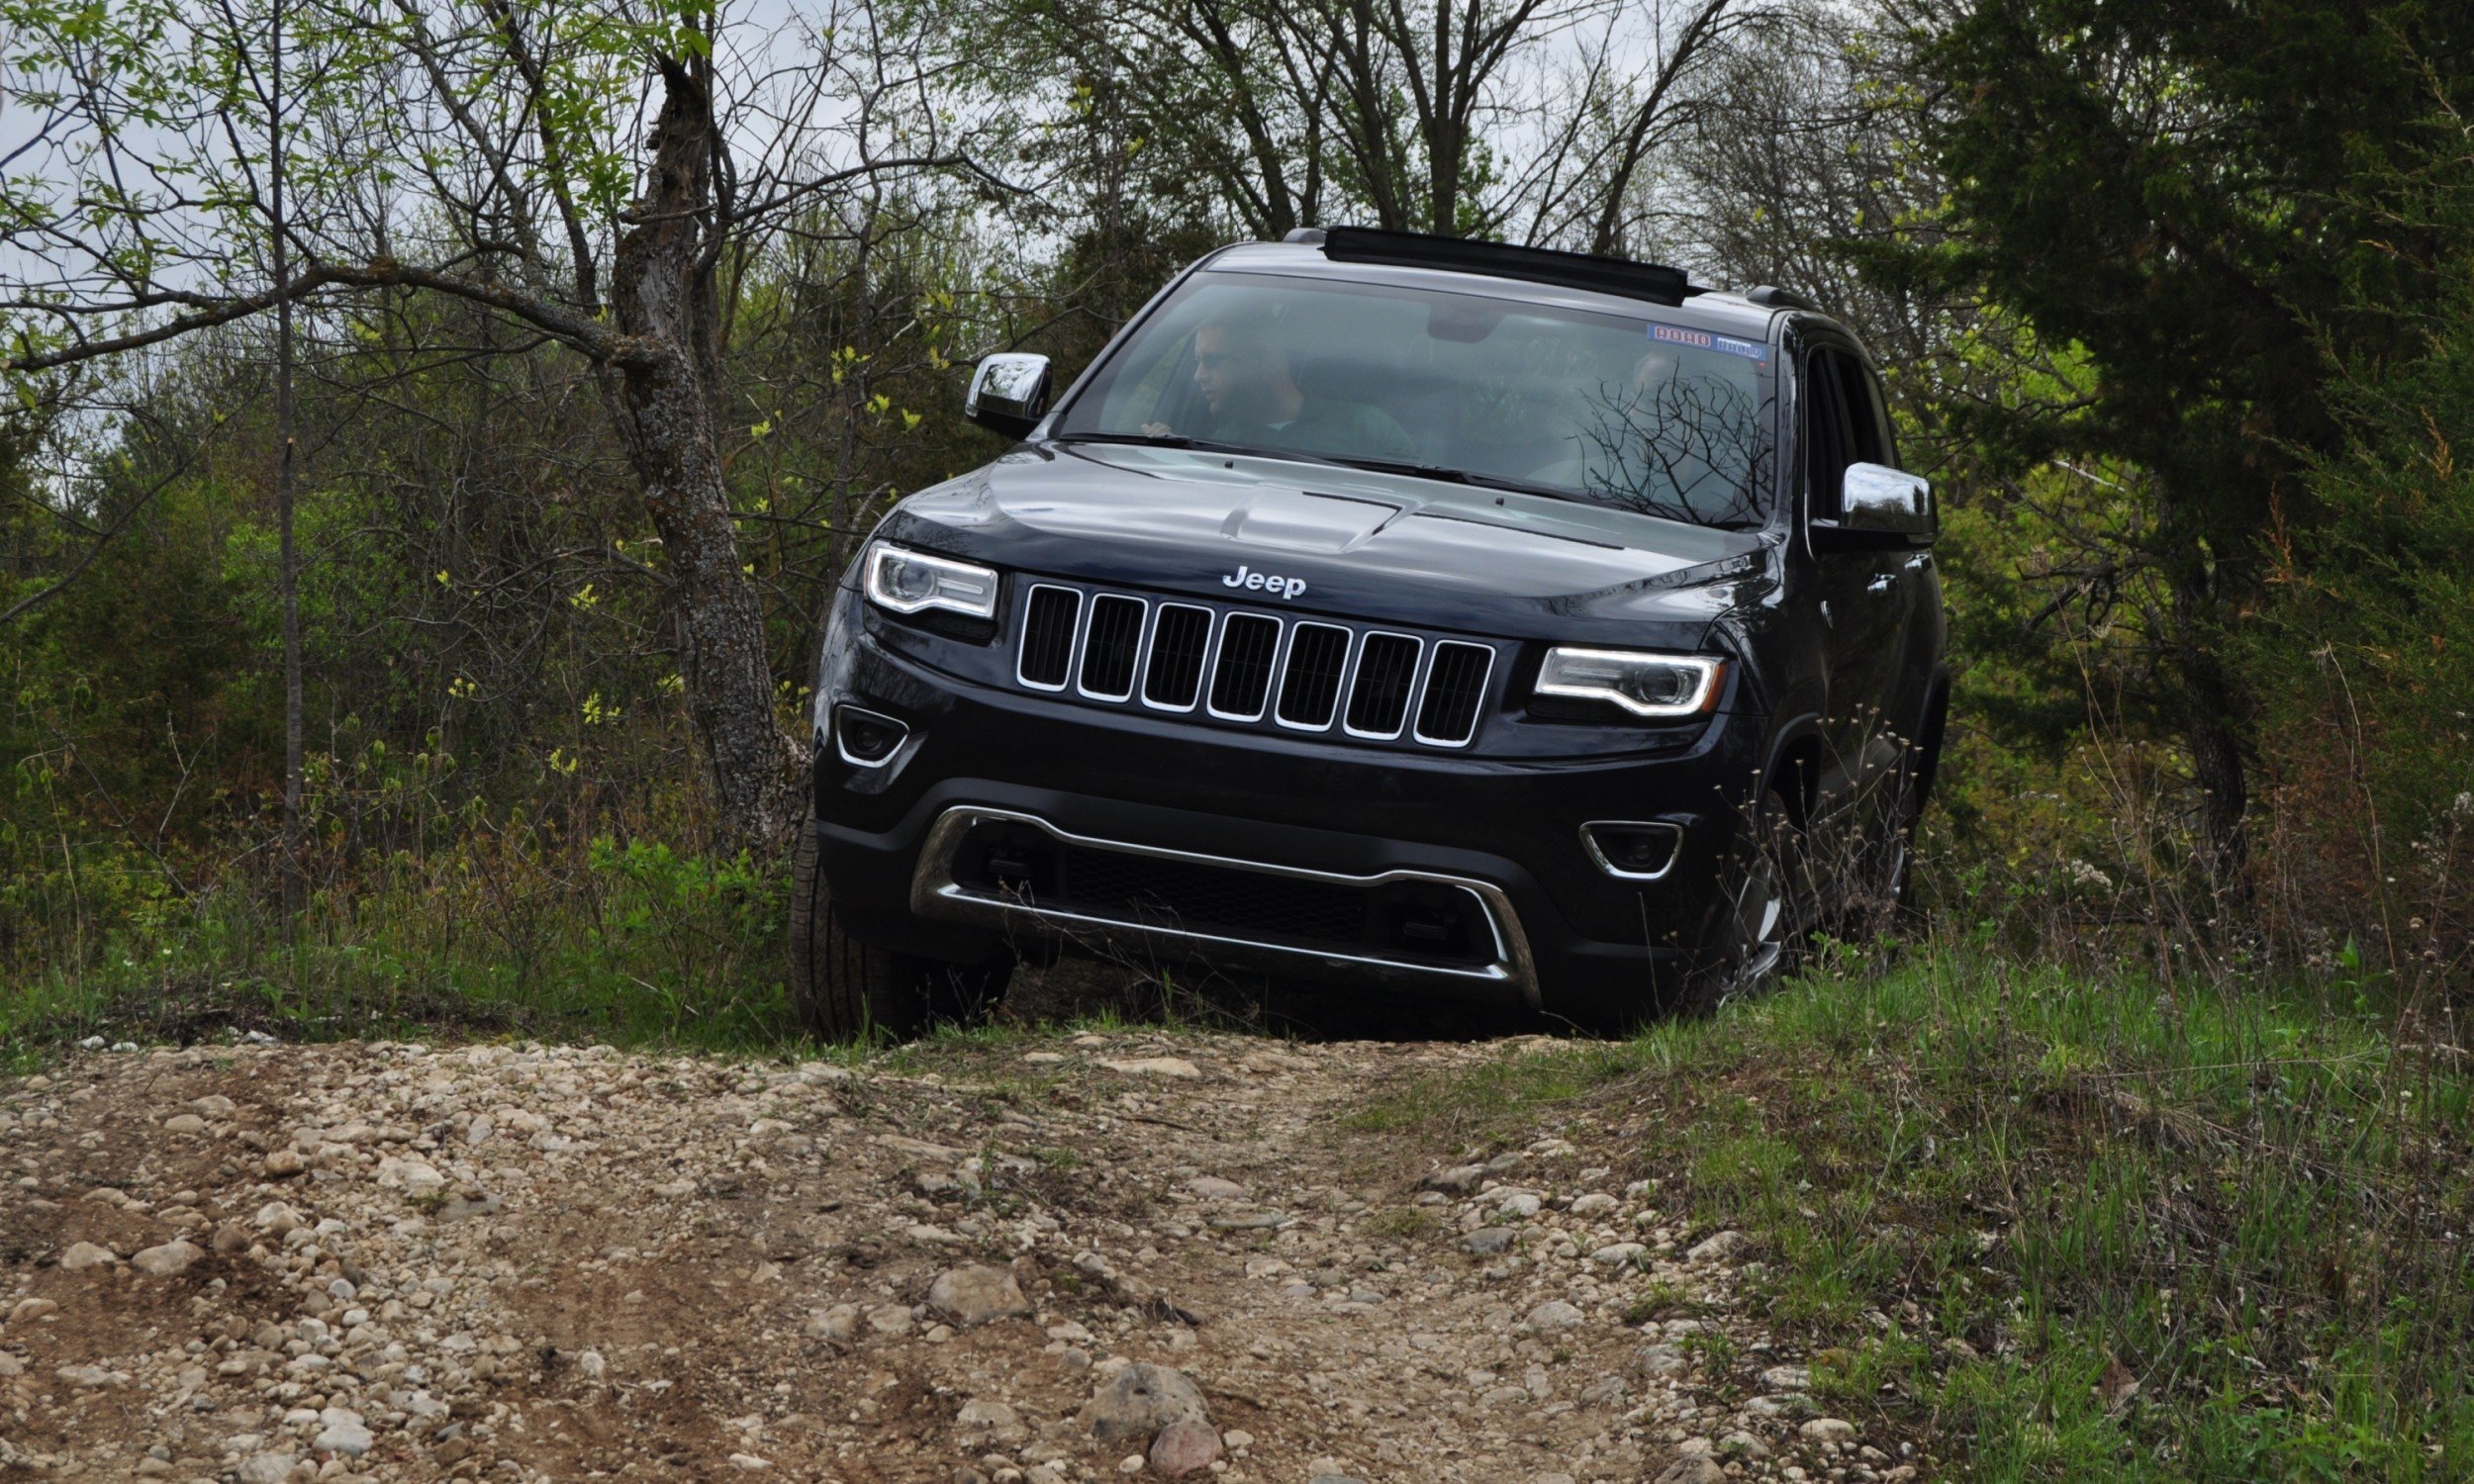 2014-Jeep-Grand-Cherokee-Shows-Its-Trail-Rated-Skills-Off-Road-40.jpg